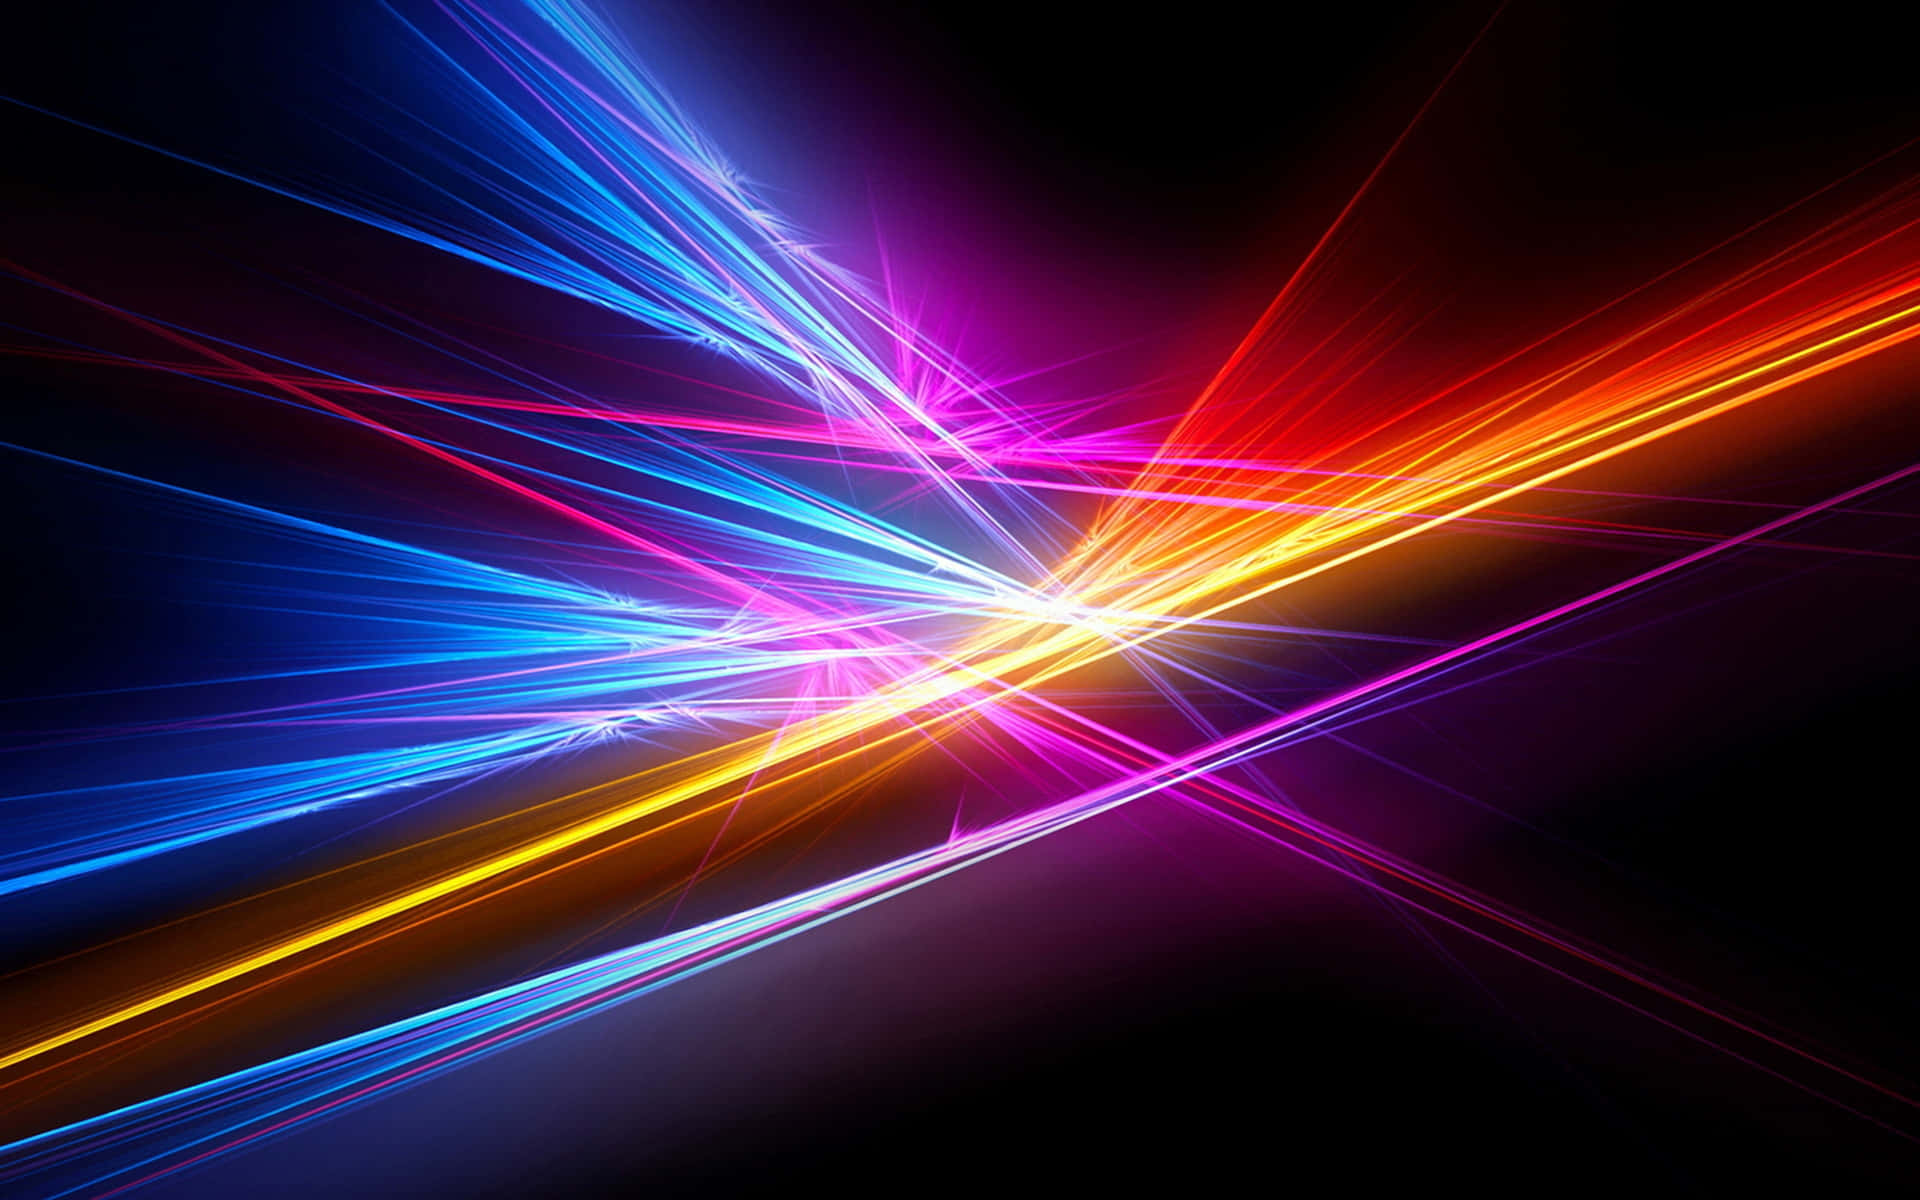 A Colorful Light Beam On A Black Background Wallpaper